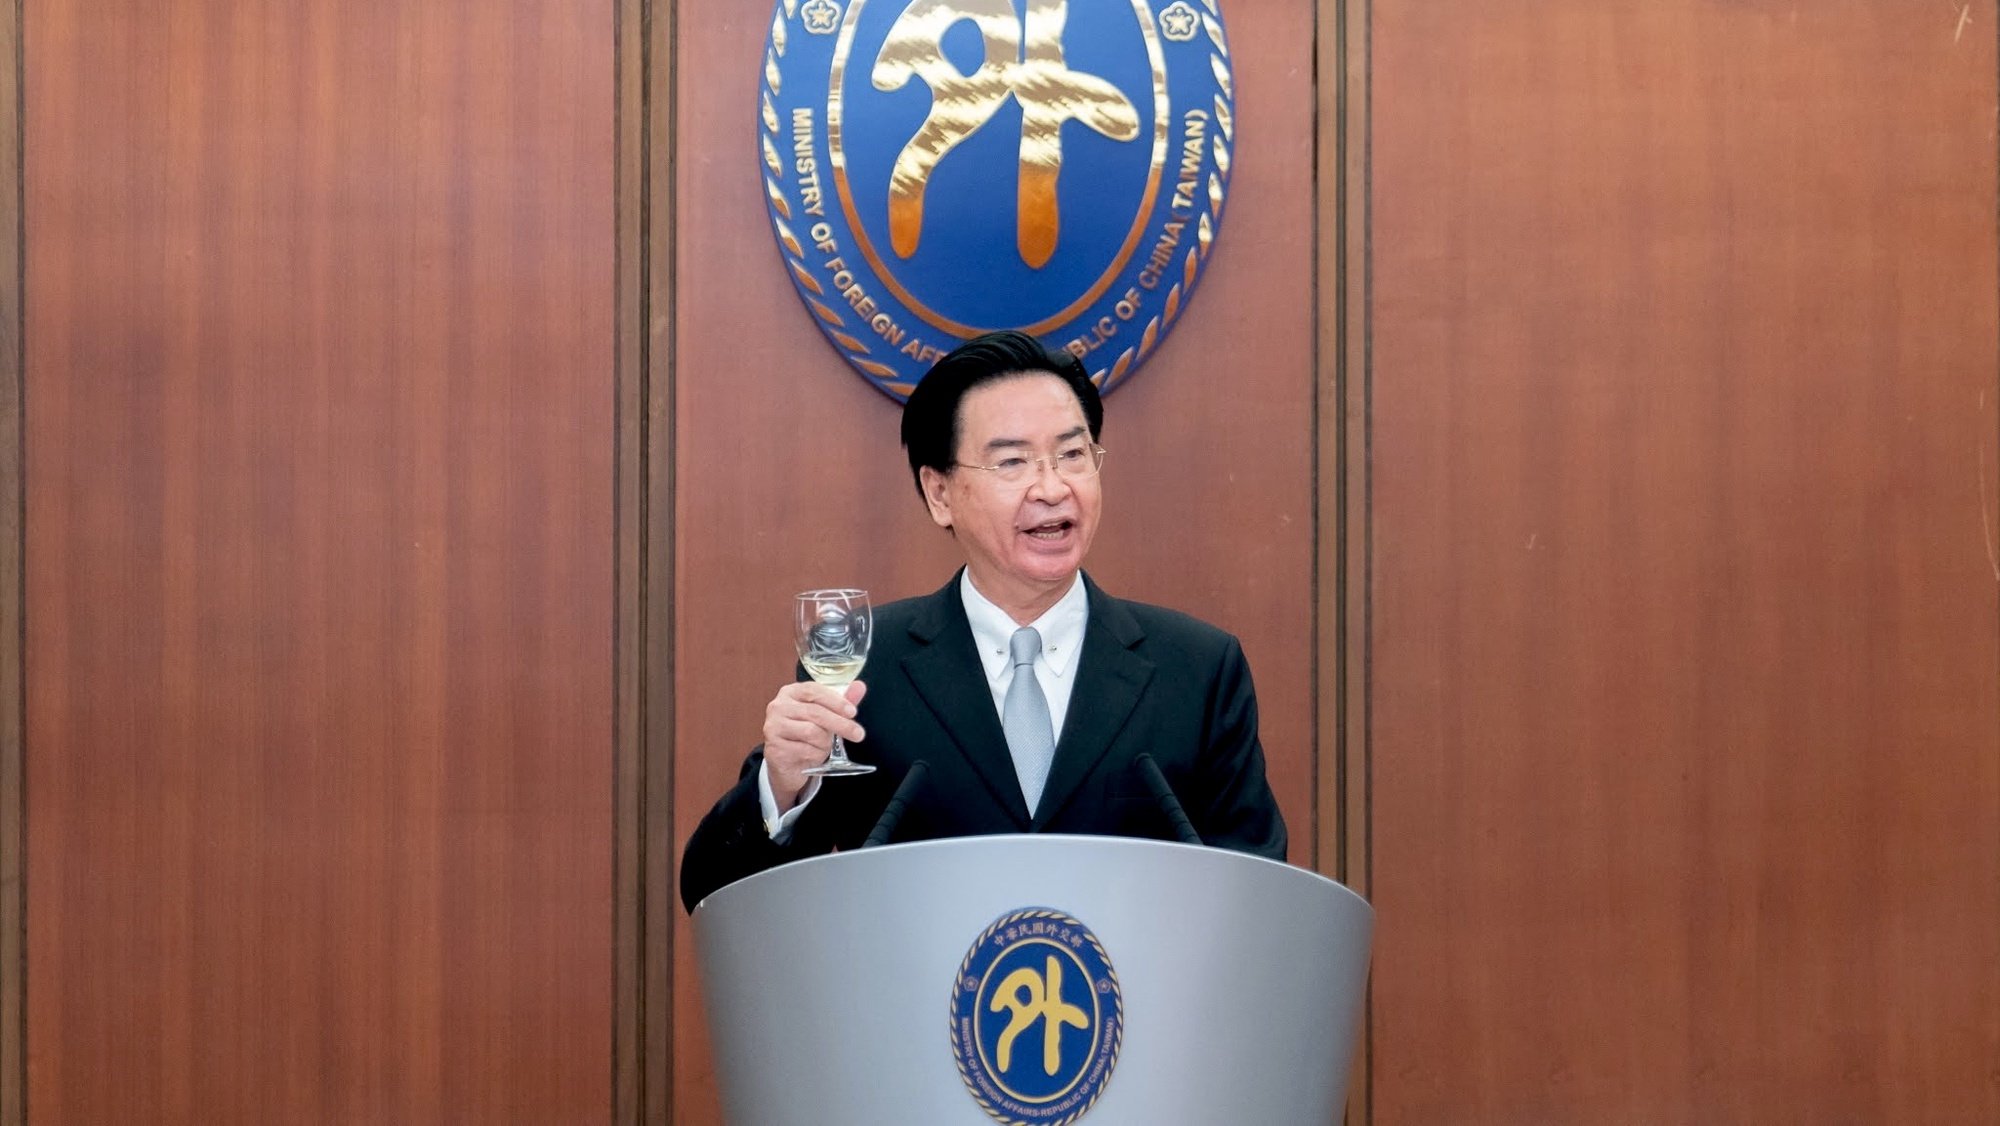 epa09610836 A handout photo made available by Taiwan Foreign Ministry shows Taiwan foreign minister Joseph Wu makes a toast to members of the Baltic States’ delegation during a meeting and luncheon inside the Foreign Ministry in Taipei, Taiwan, 29 November 2021. The delegation which is led by Lithuanian lawmaker Matas Maldeikis consisted of parliamentarians from Lithuania, Latvia and Estonia, which will be taking part in the Open Parliament Forum 2021 in Taipei, in addition to attending meetings with Taiwanese high ranking officials including Taiwan foreign minister Joseph Wu, amid China rising threats from China.  EPA/TAIWAN FOREIGN MINISTRY HANDOUT  HANDOUT EDITORIAL USE ONLY/NO SALES